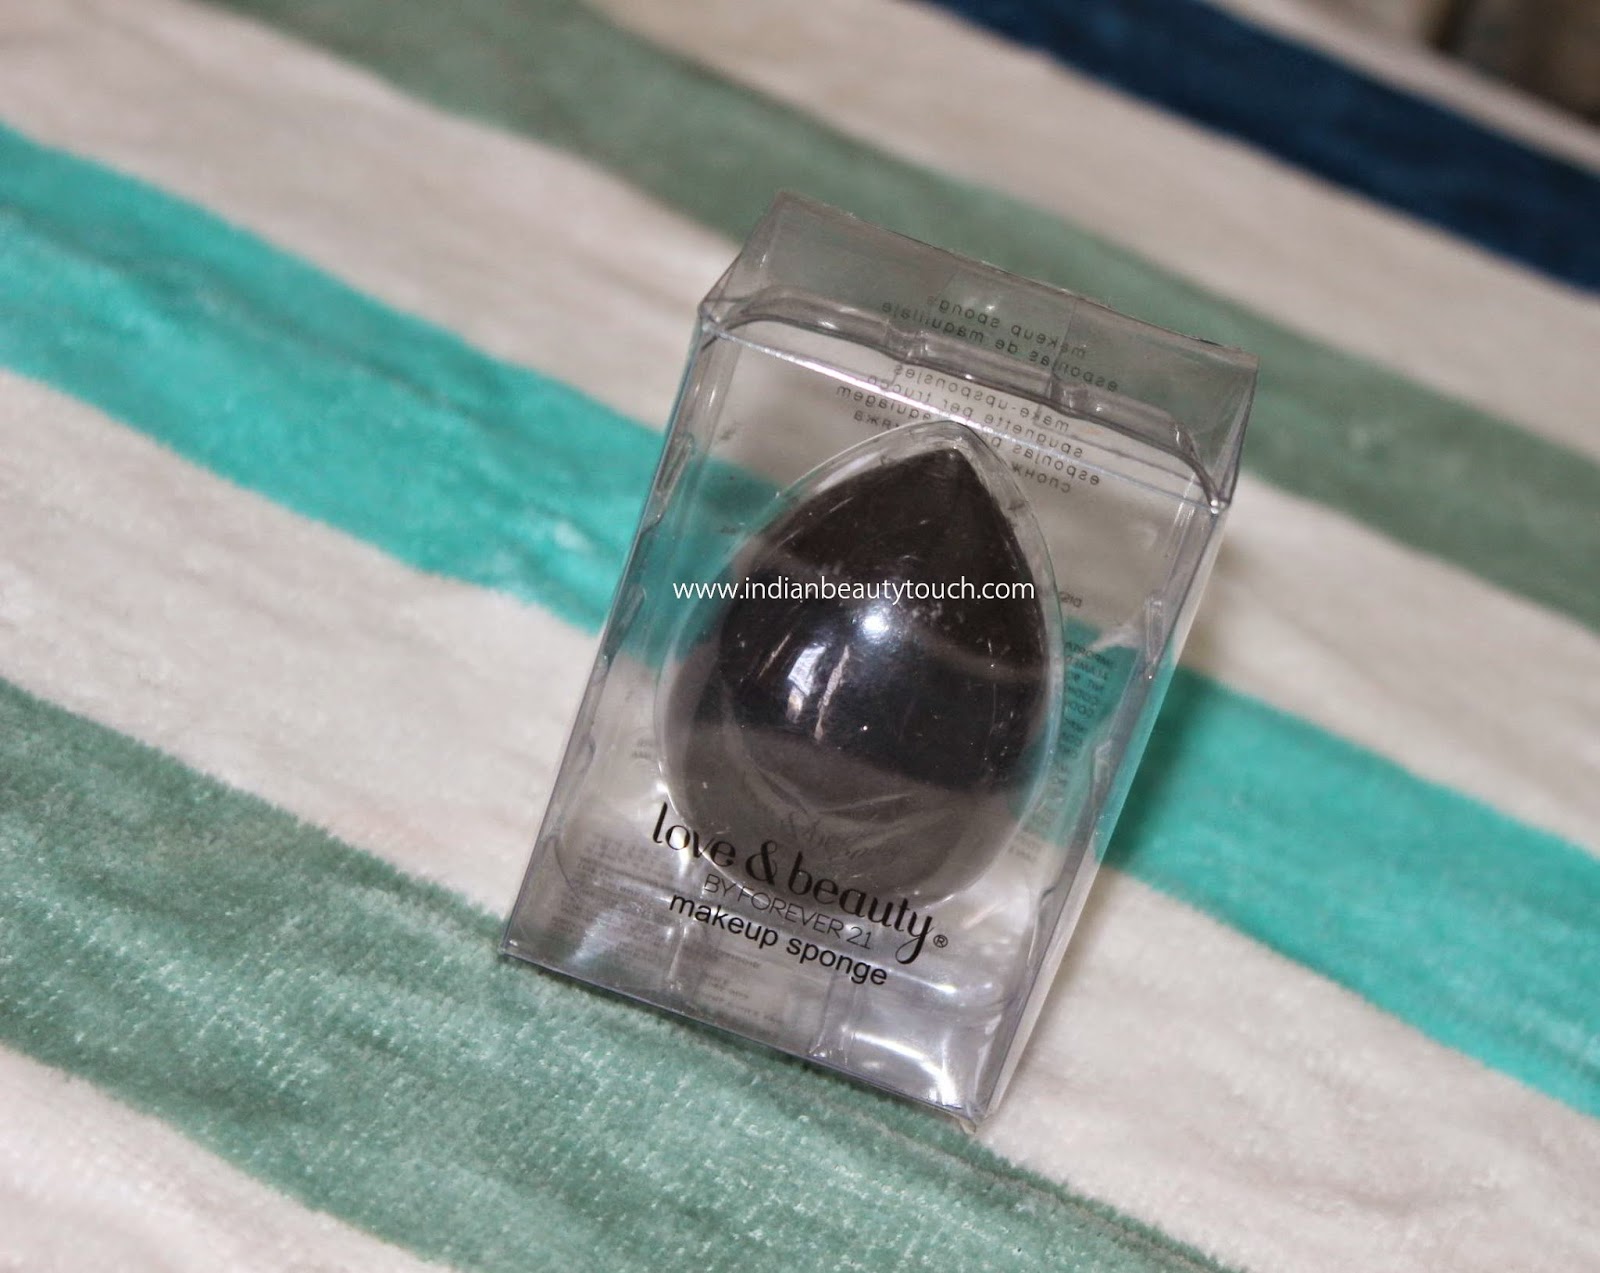 Review n Demo : Love  Beauty by Forever 21 Makeup Sponge | Indian ...